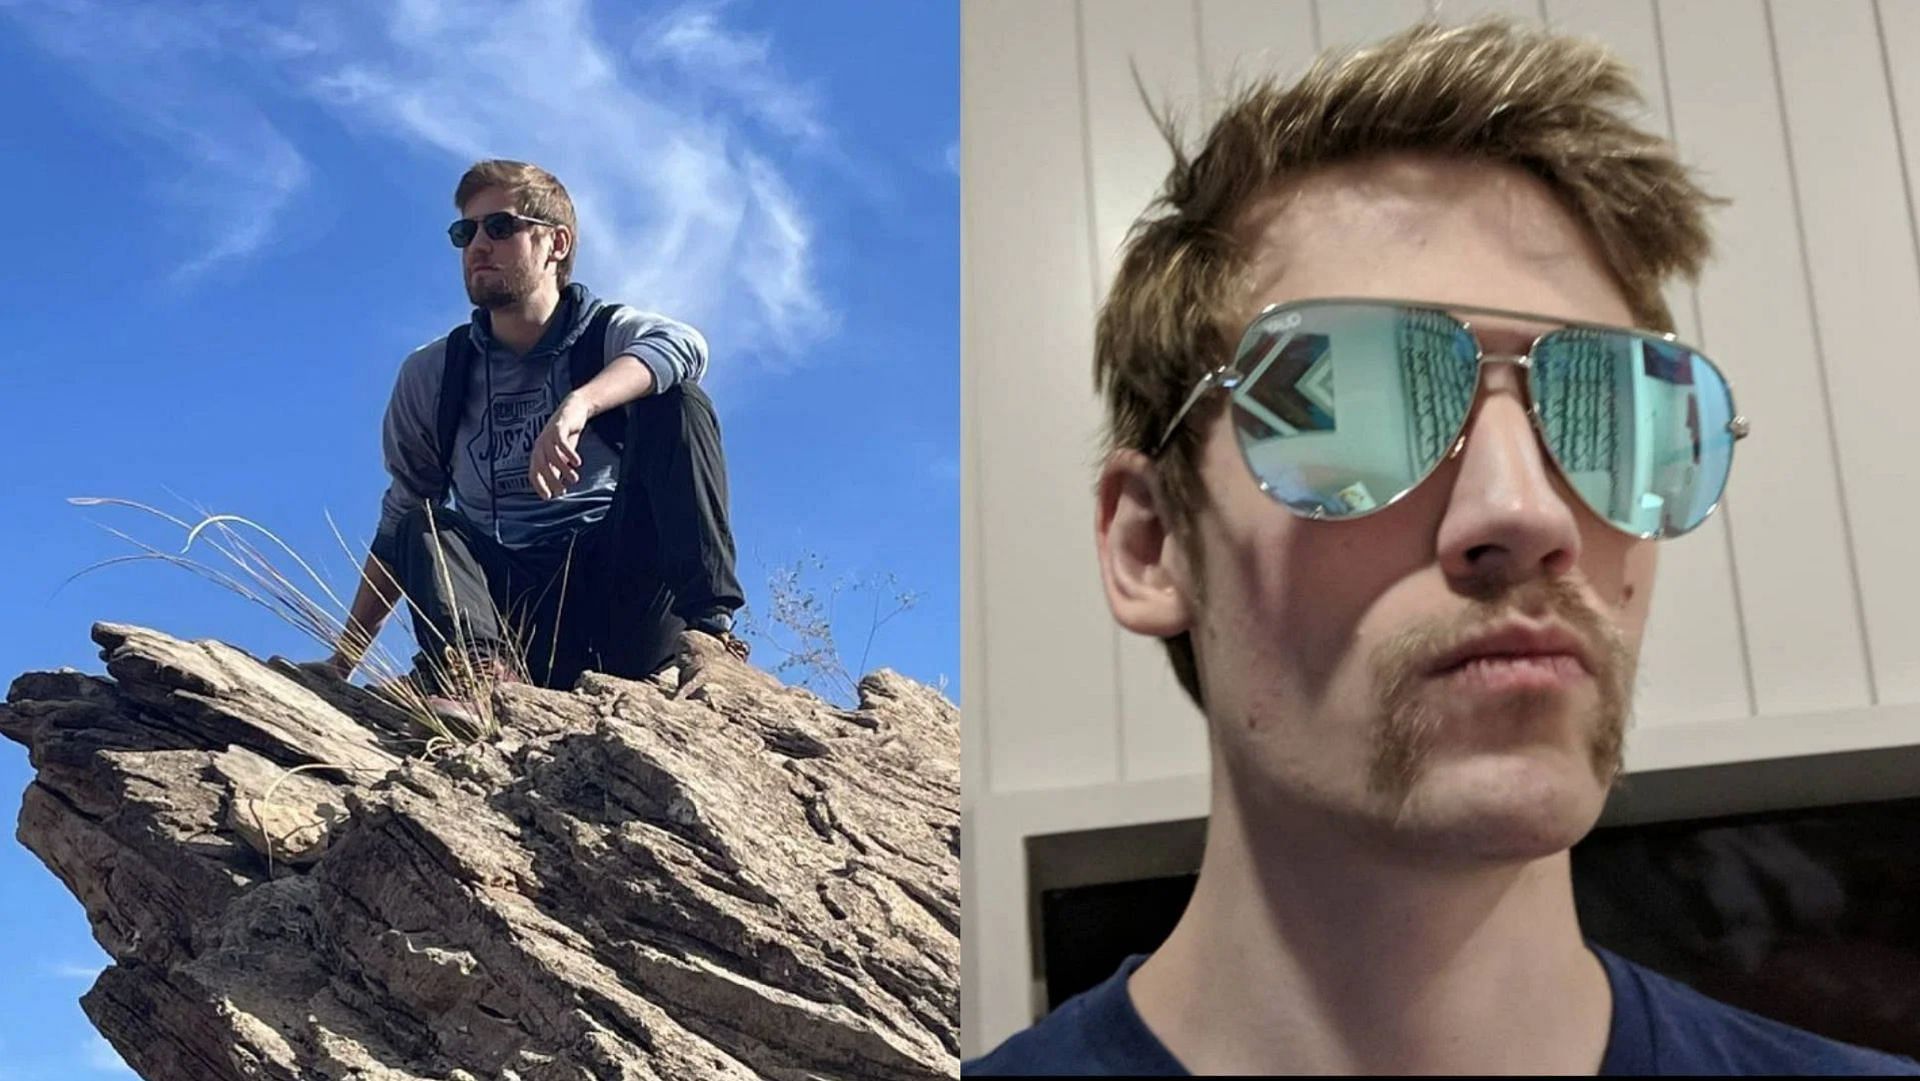 Twitch streamer Sodapoppin regrets not signing an exclusive deal with Mixer (Image via Sportskeeda)